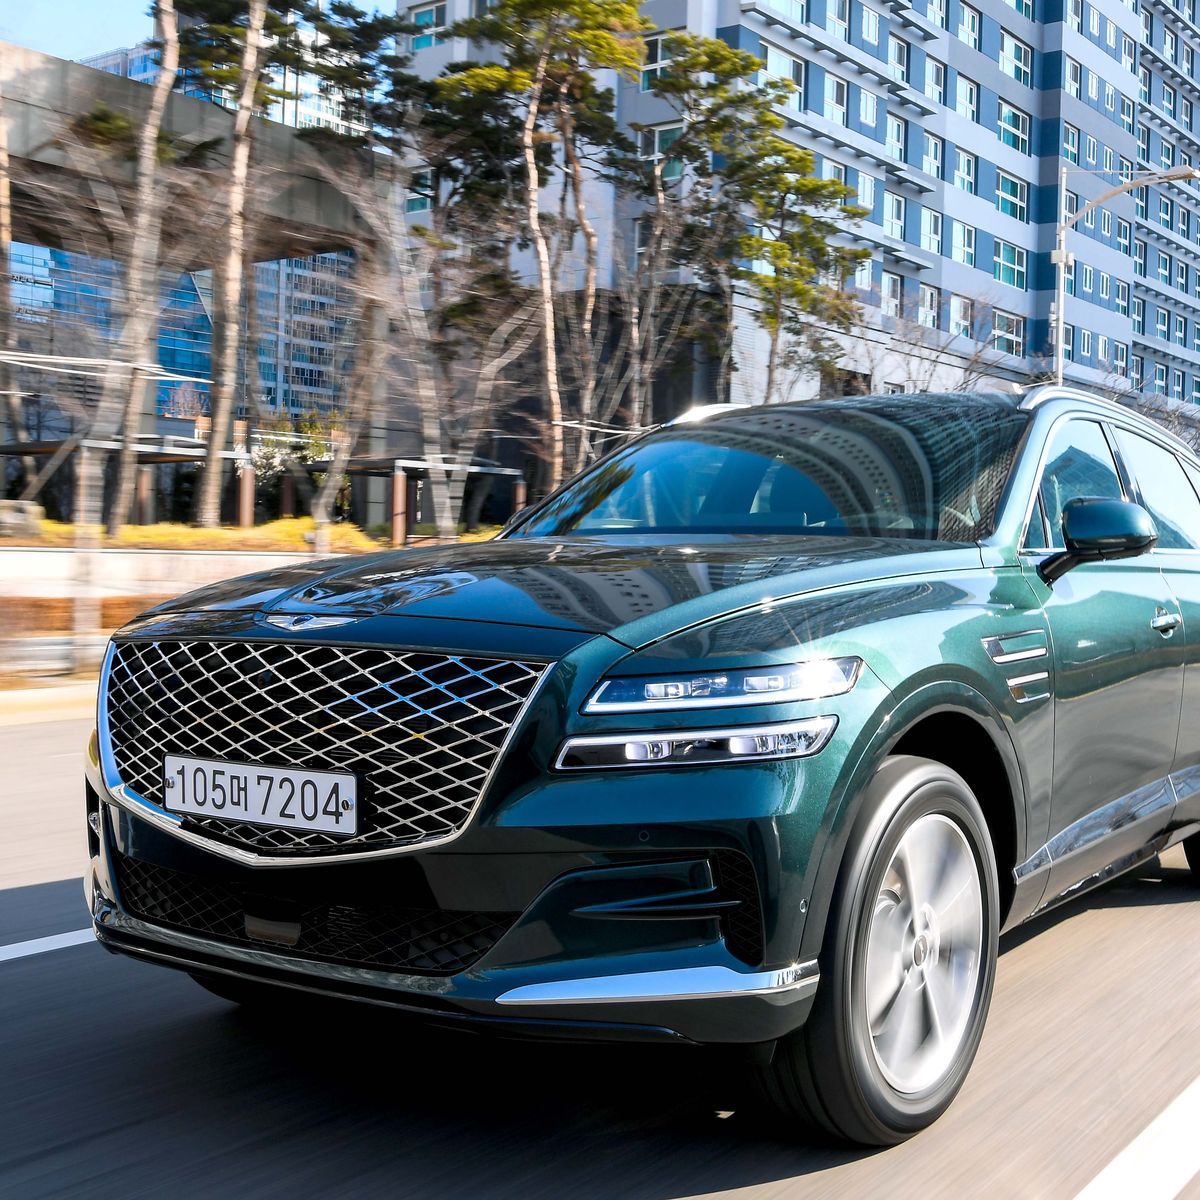 2021 Genesis GV80 Will Change the Game - SUV Review, Photos